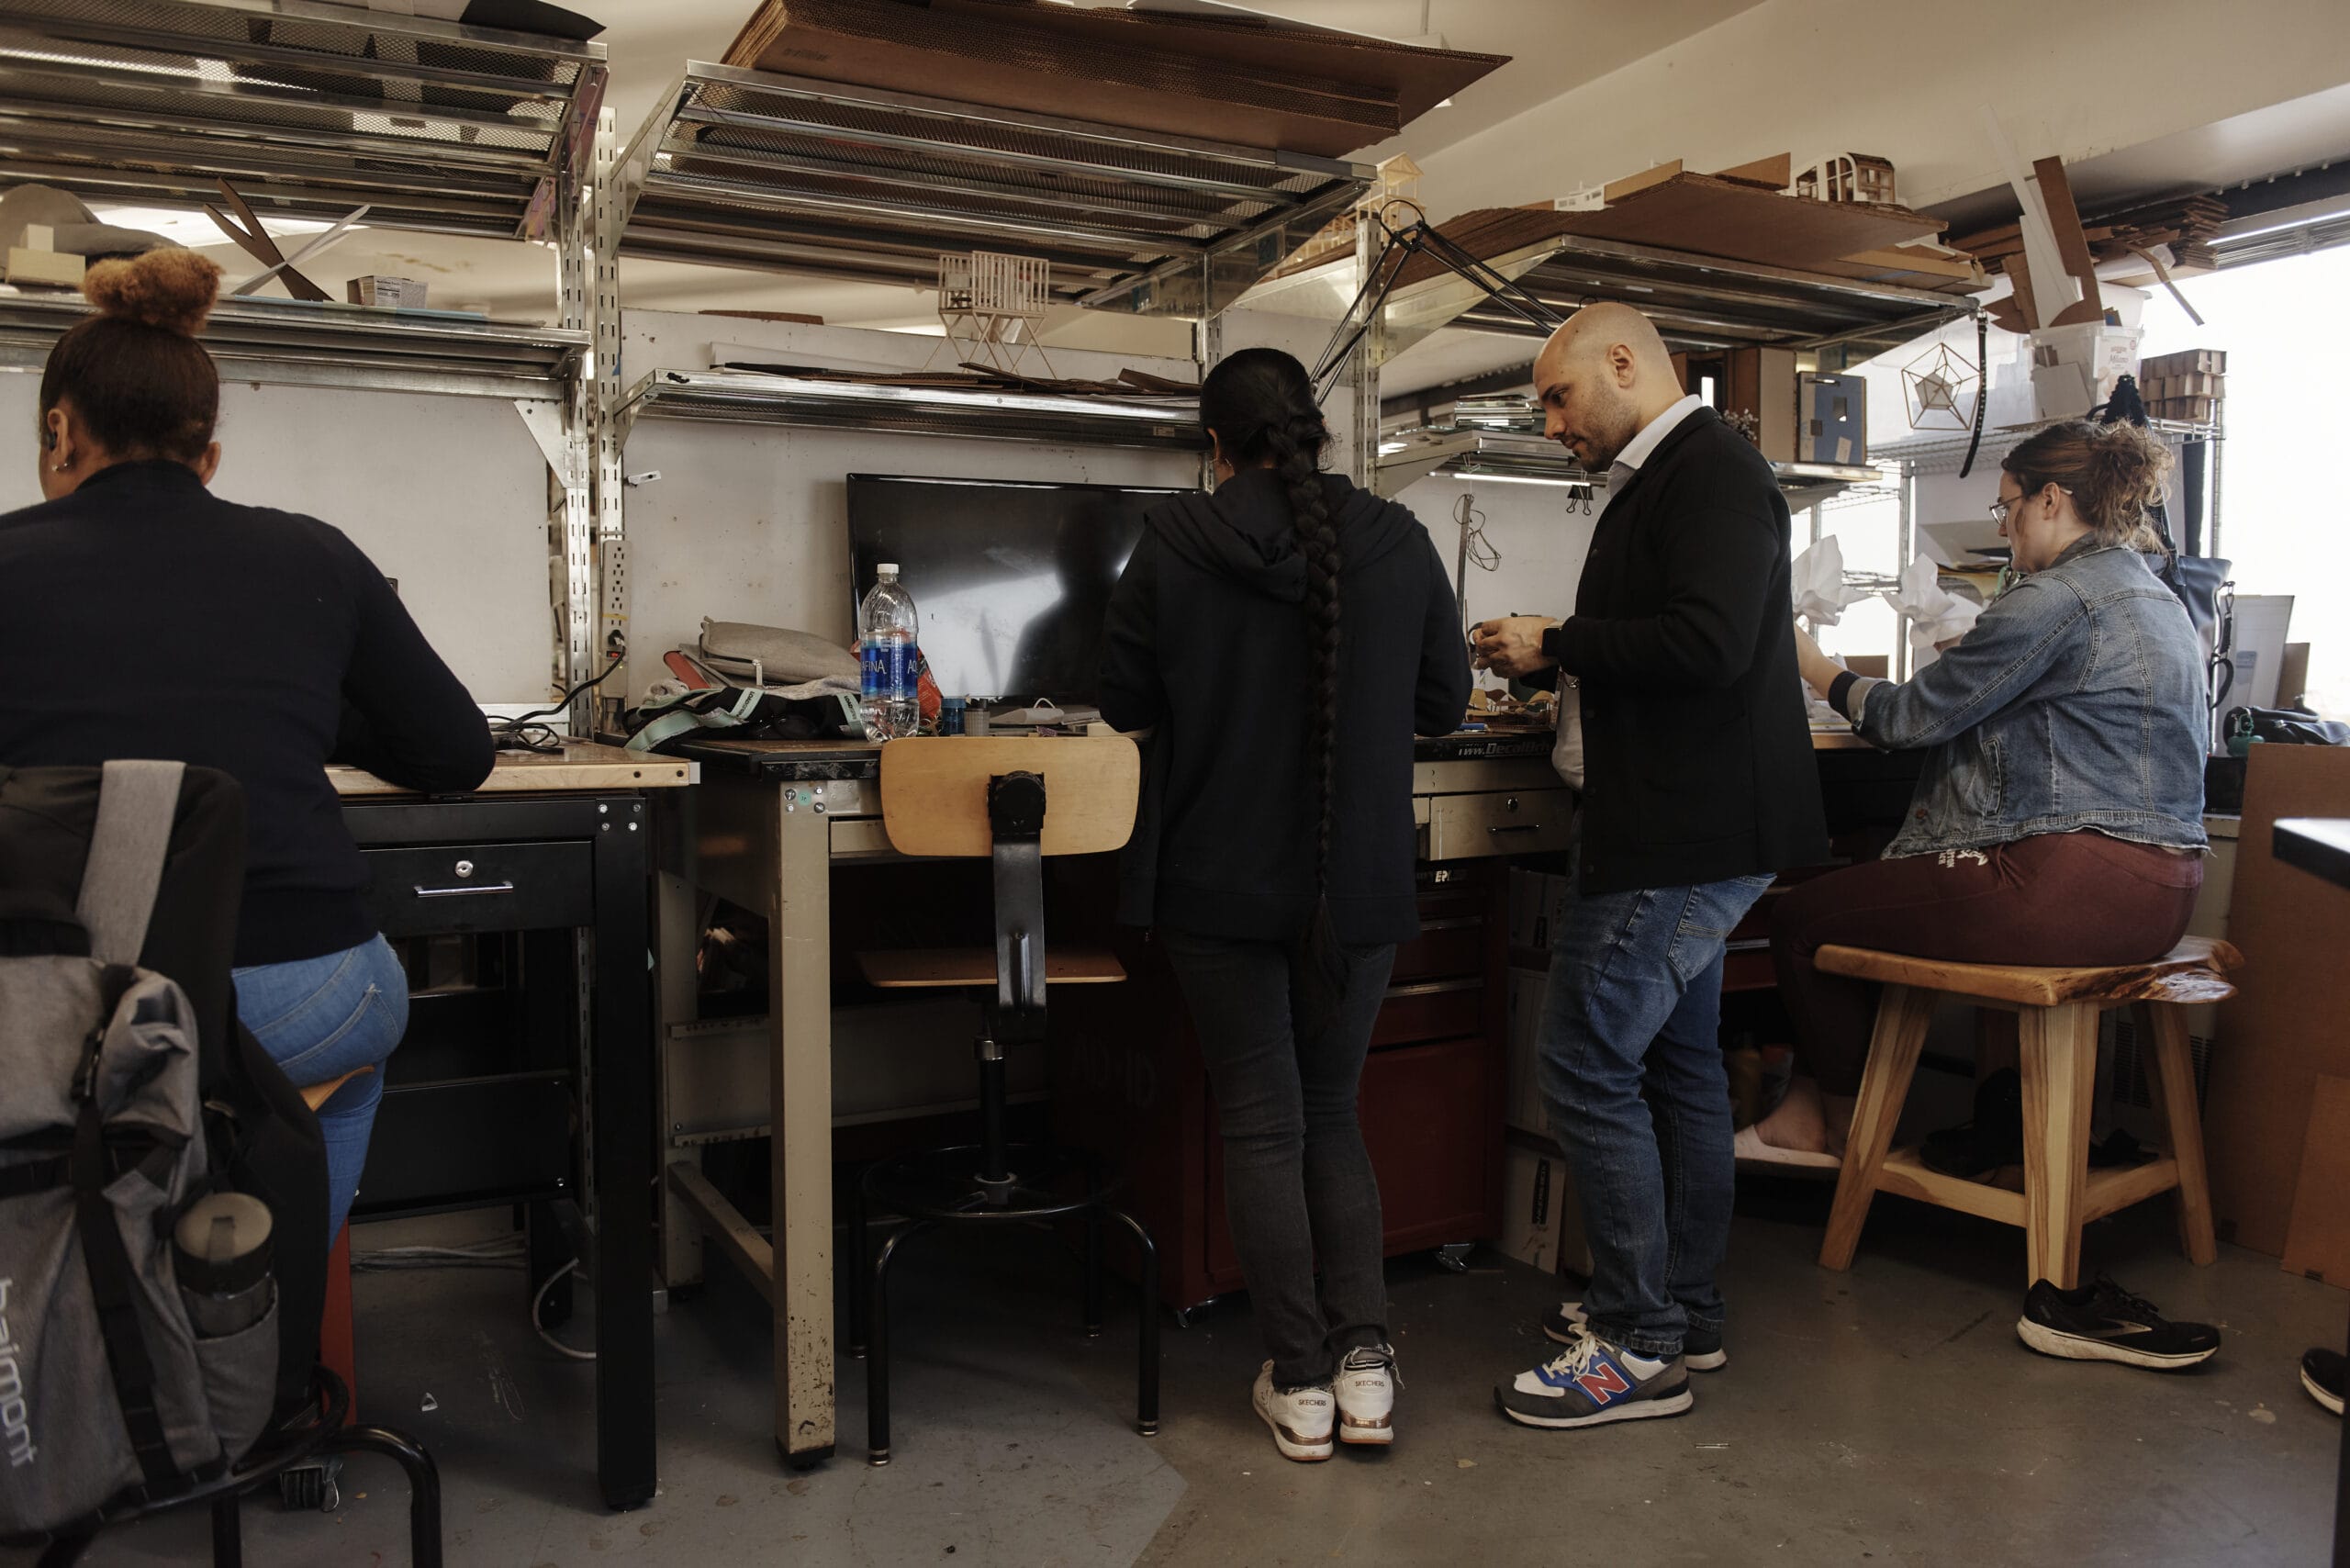 Students work at high-top desks in the architecture studios.